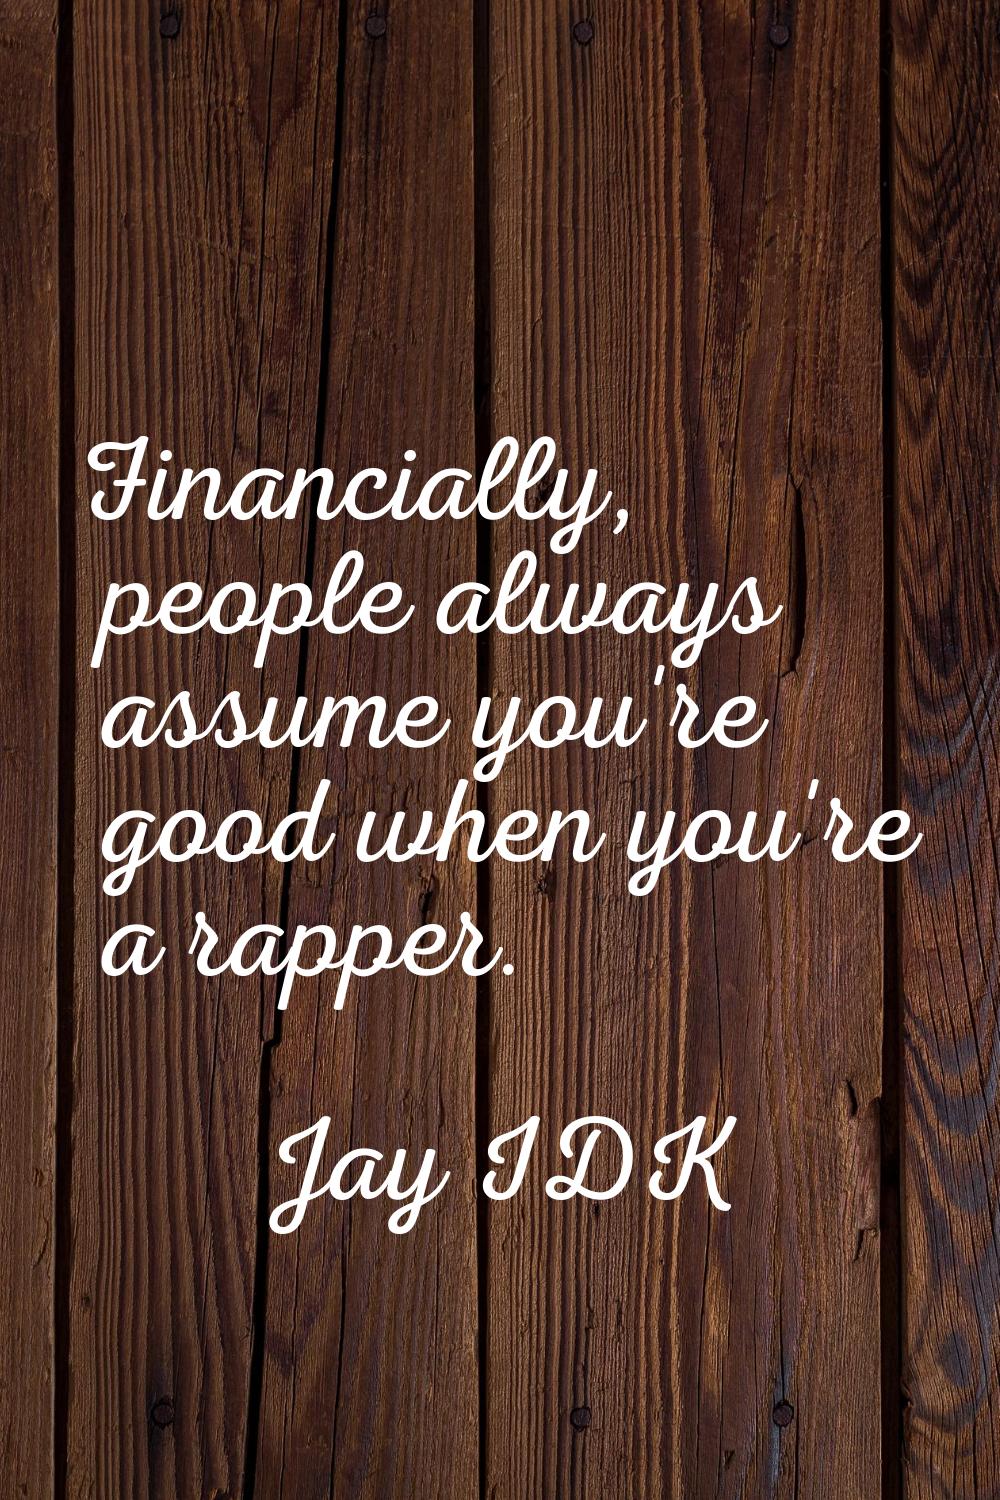 Financially, people always assume you're good when you're a rapper.